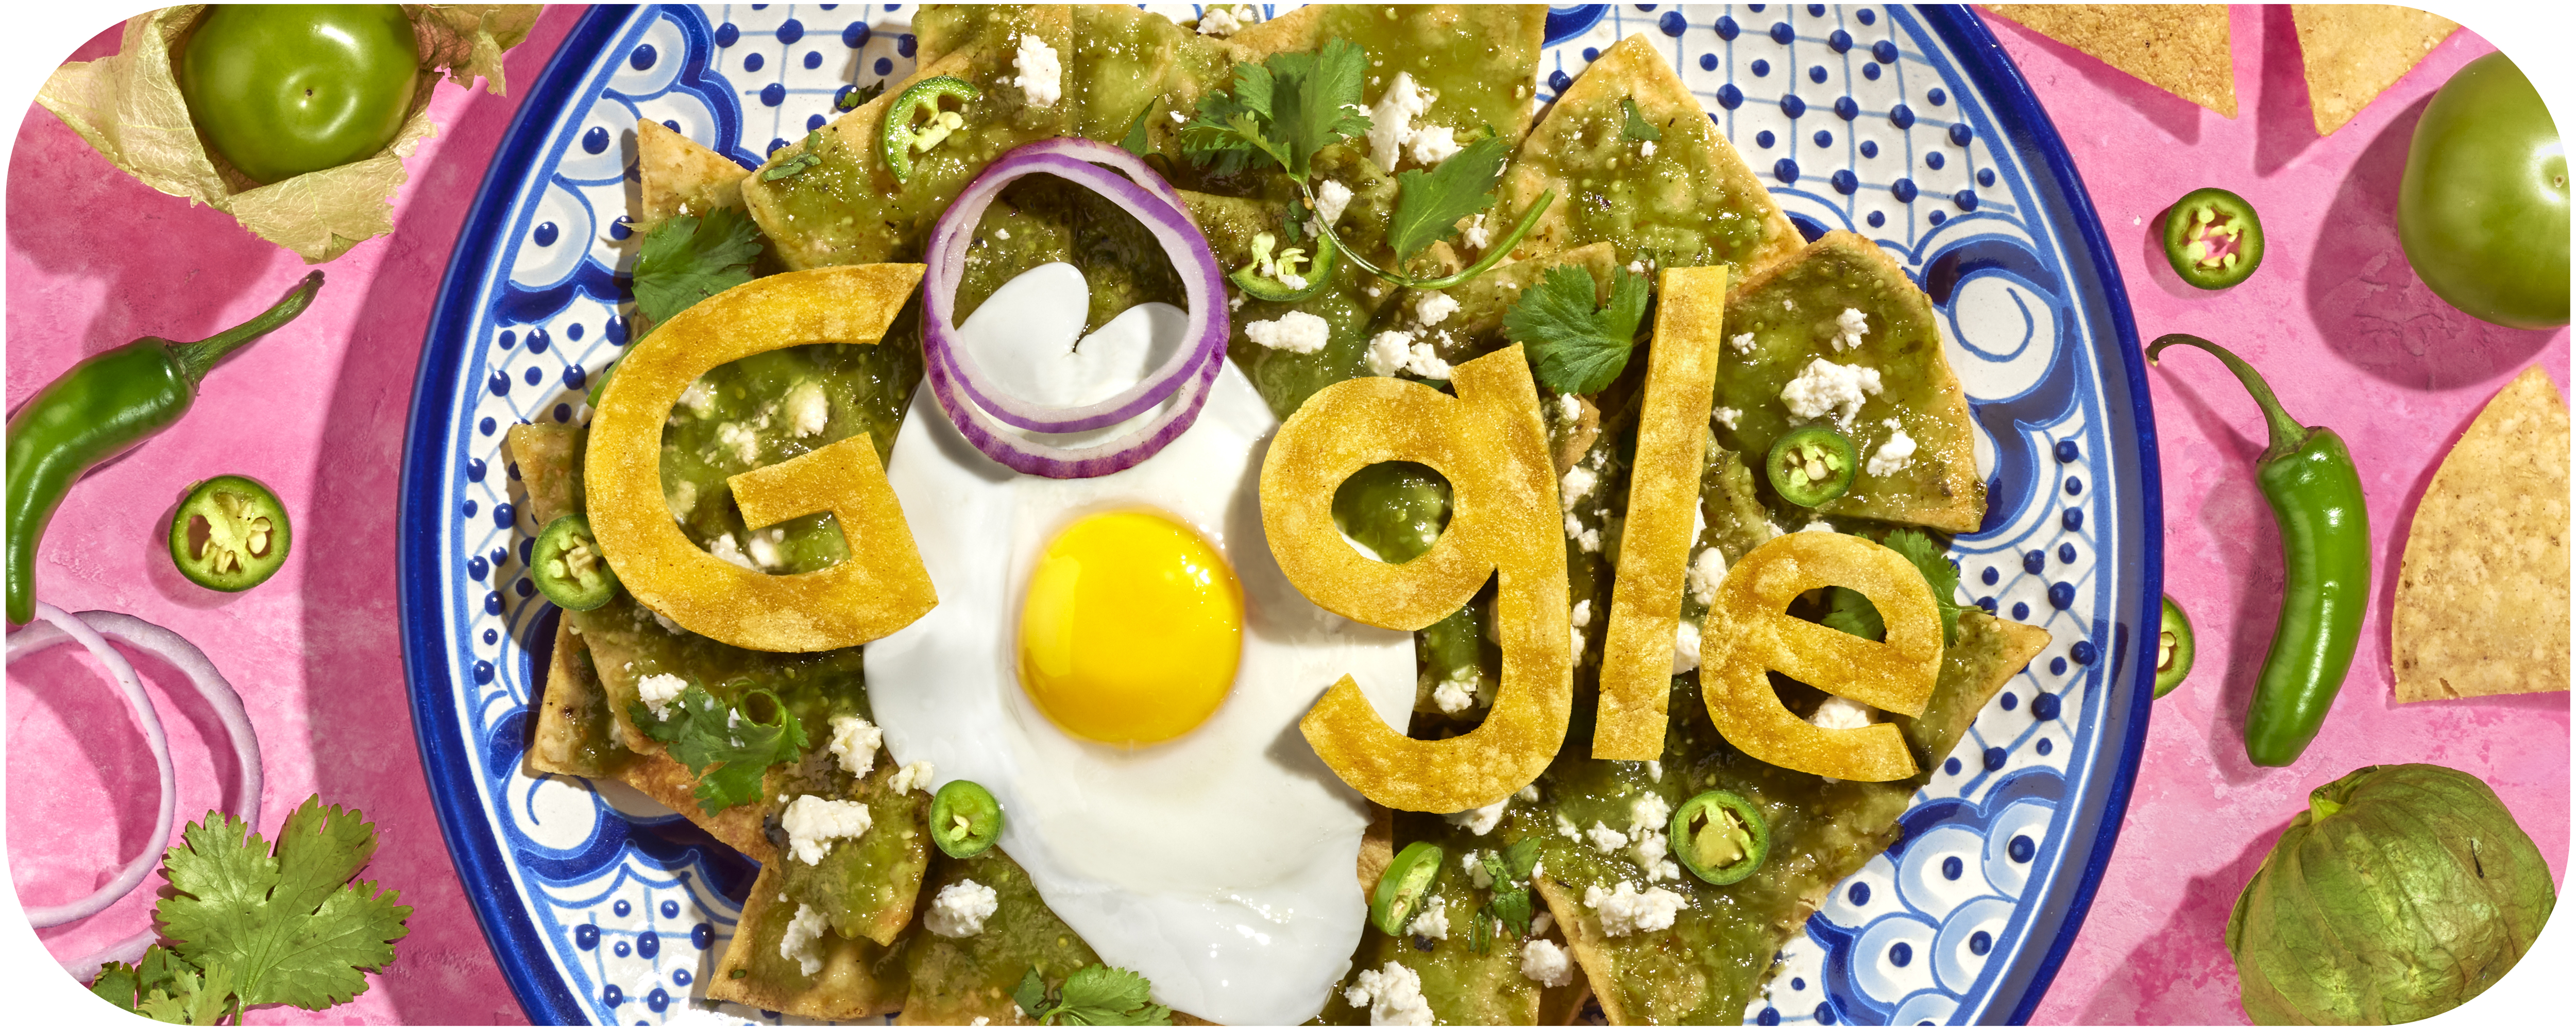 Colorful animated illustration of a plate of nachos garnished with green salsa, jalepenos and cilantro. Google letters are made out of the tortilla with the letters O made out of an onion and an egg. In the background of the illustration are more jalepenos, onions and cilantros. 